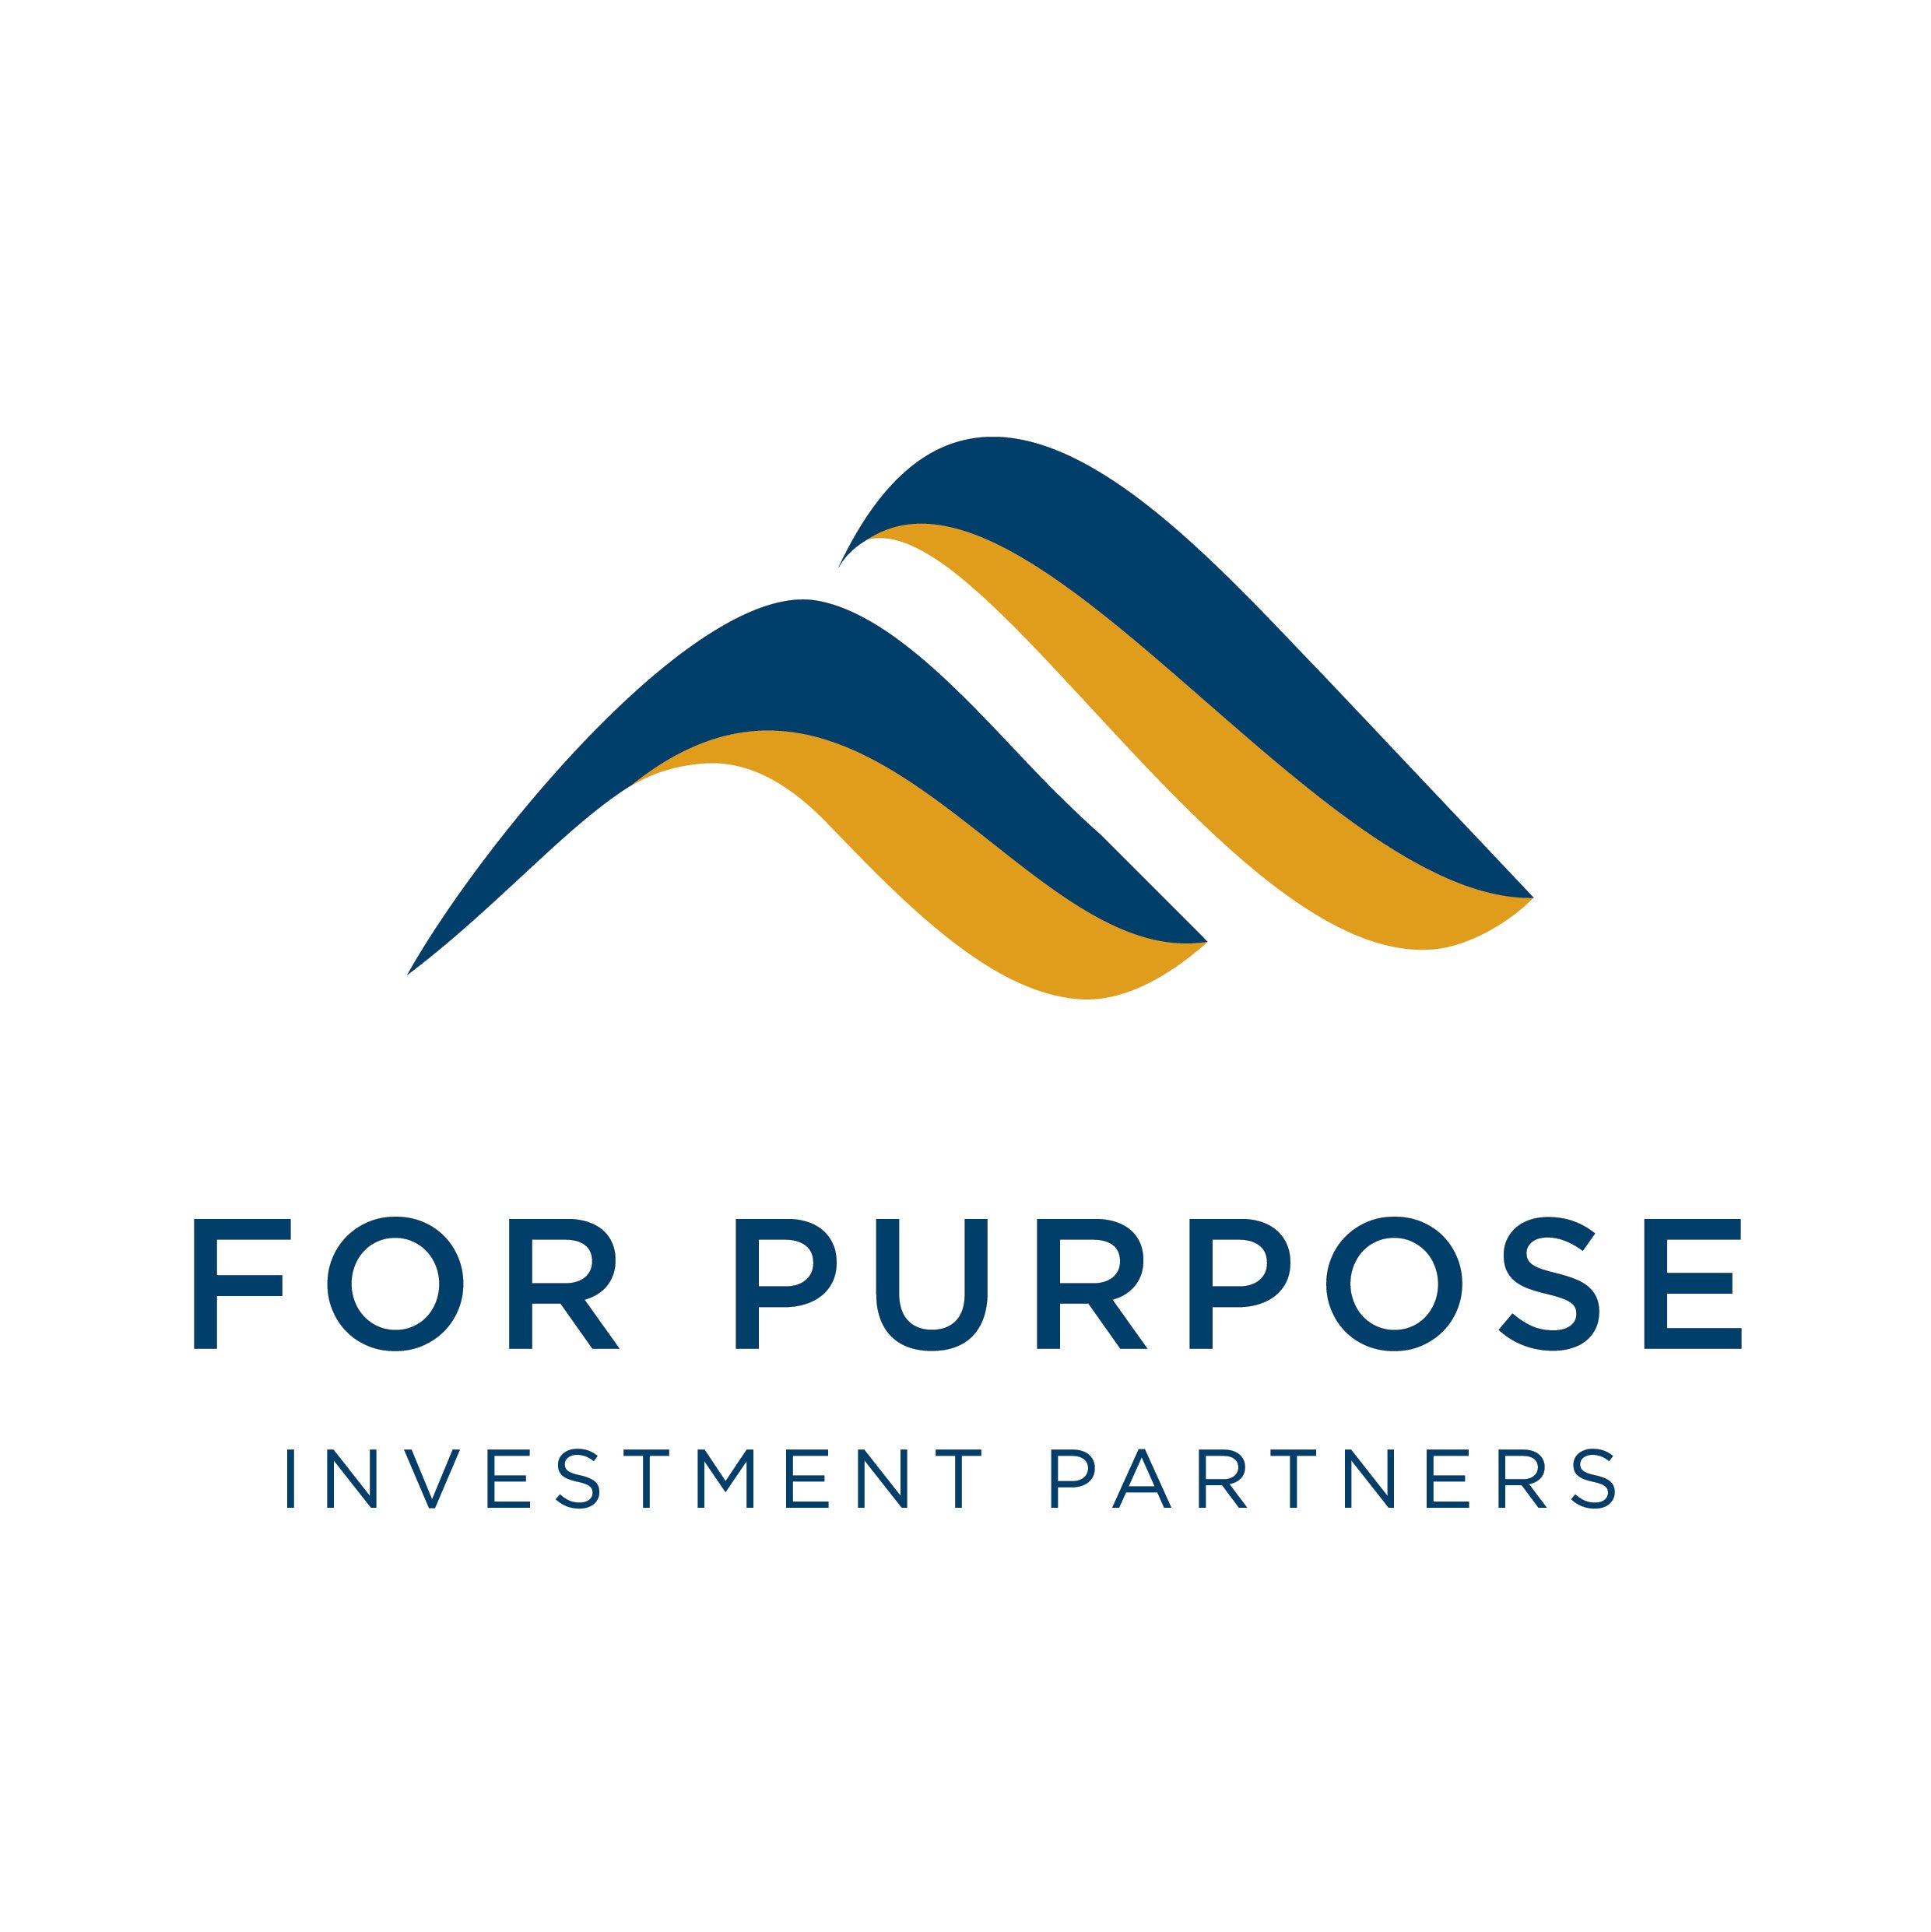 For Purpose Investment Partners